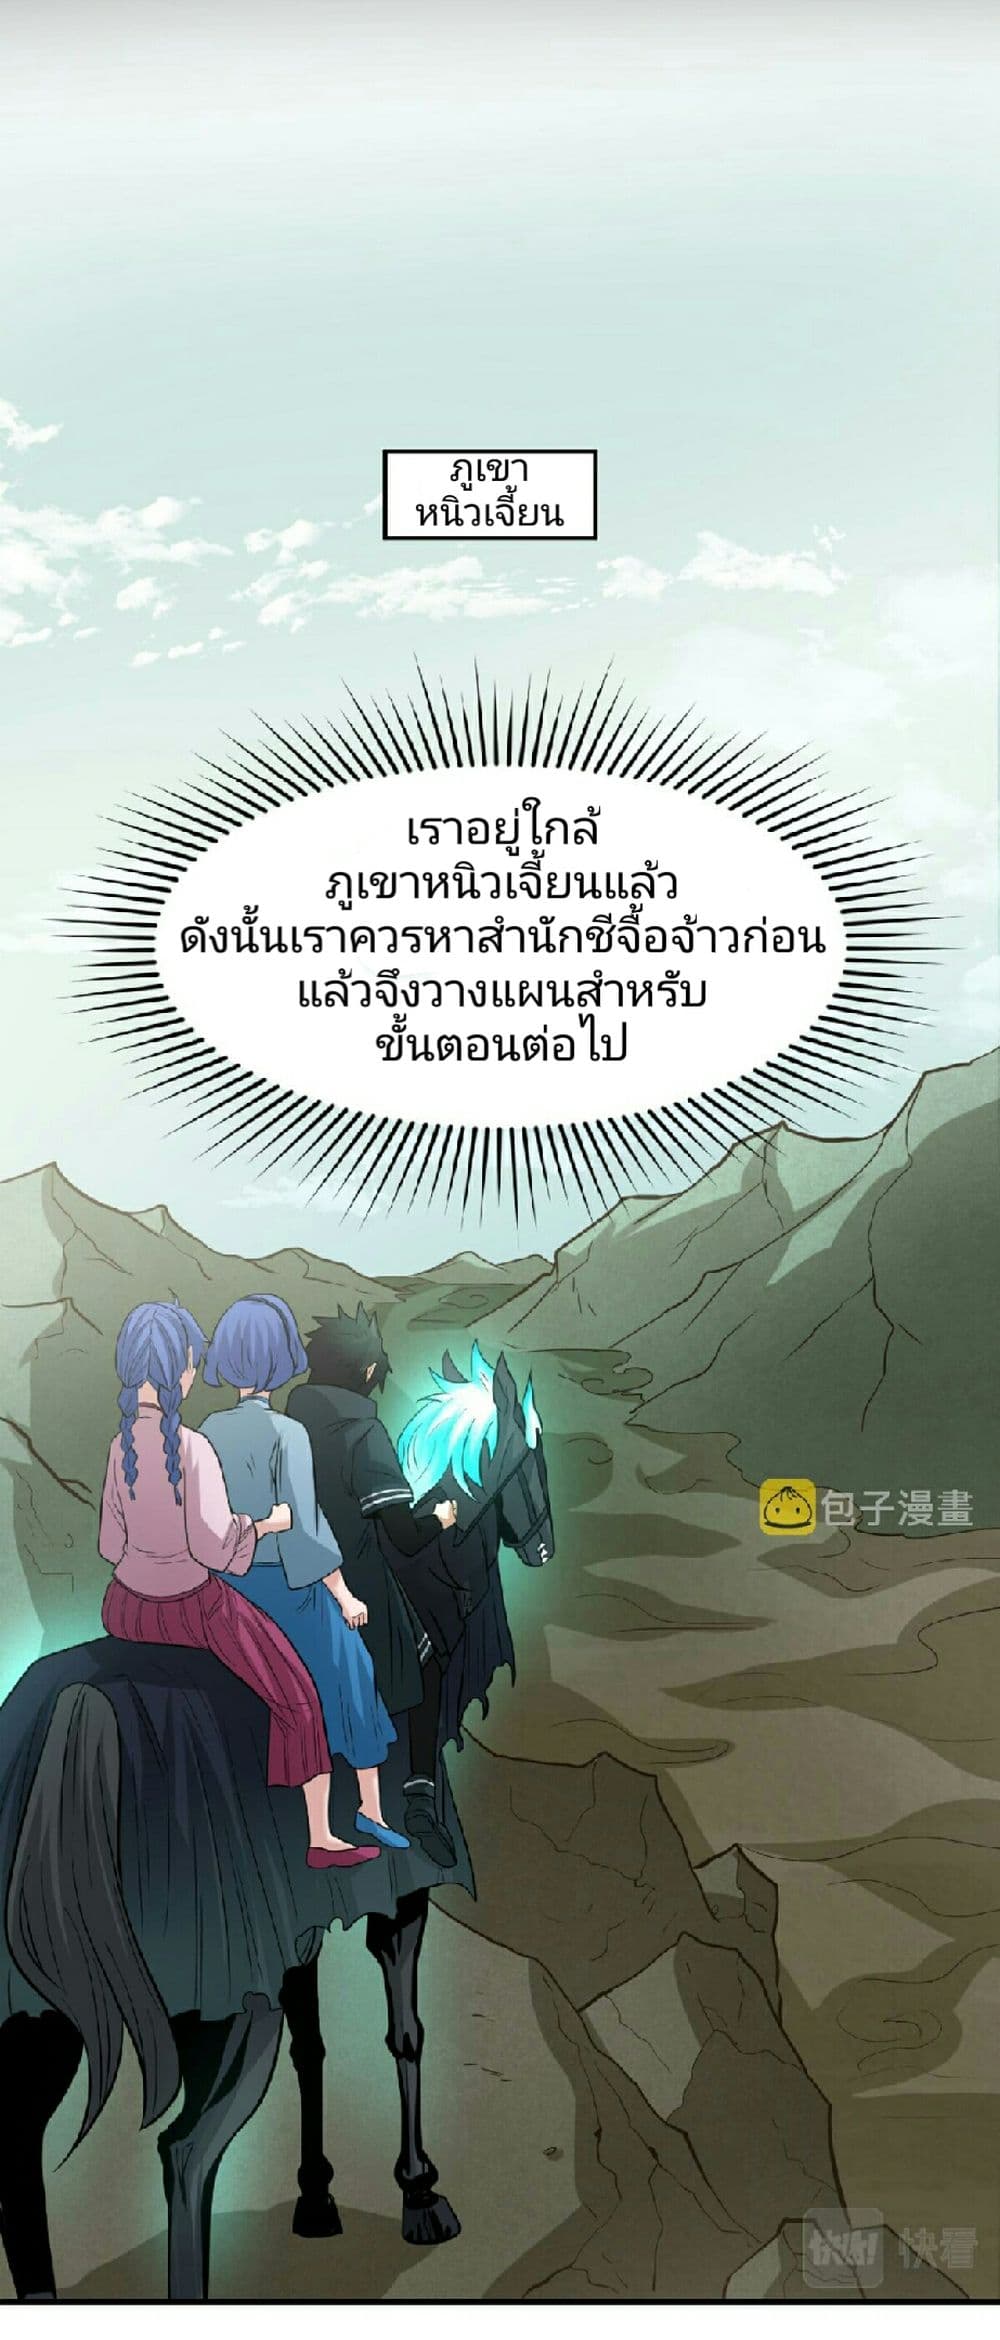 The Age of Ghost Spirits à¸à¸­à¸à¸à¸µà¹ 49 (20)